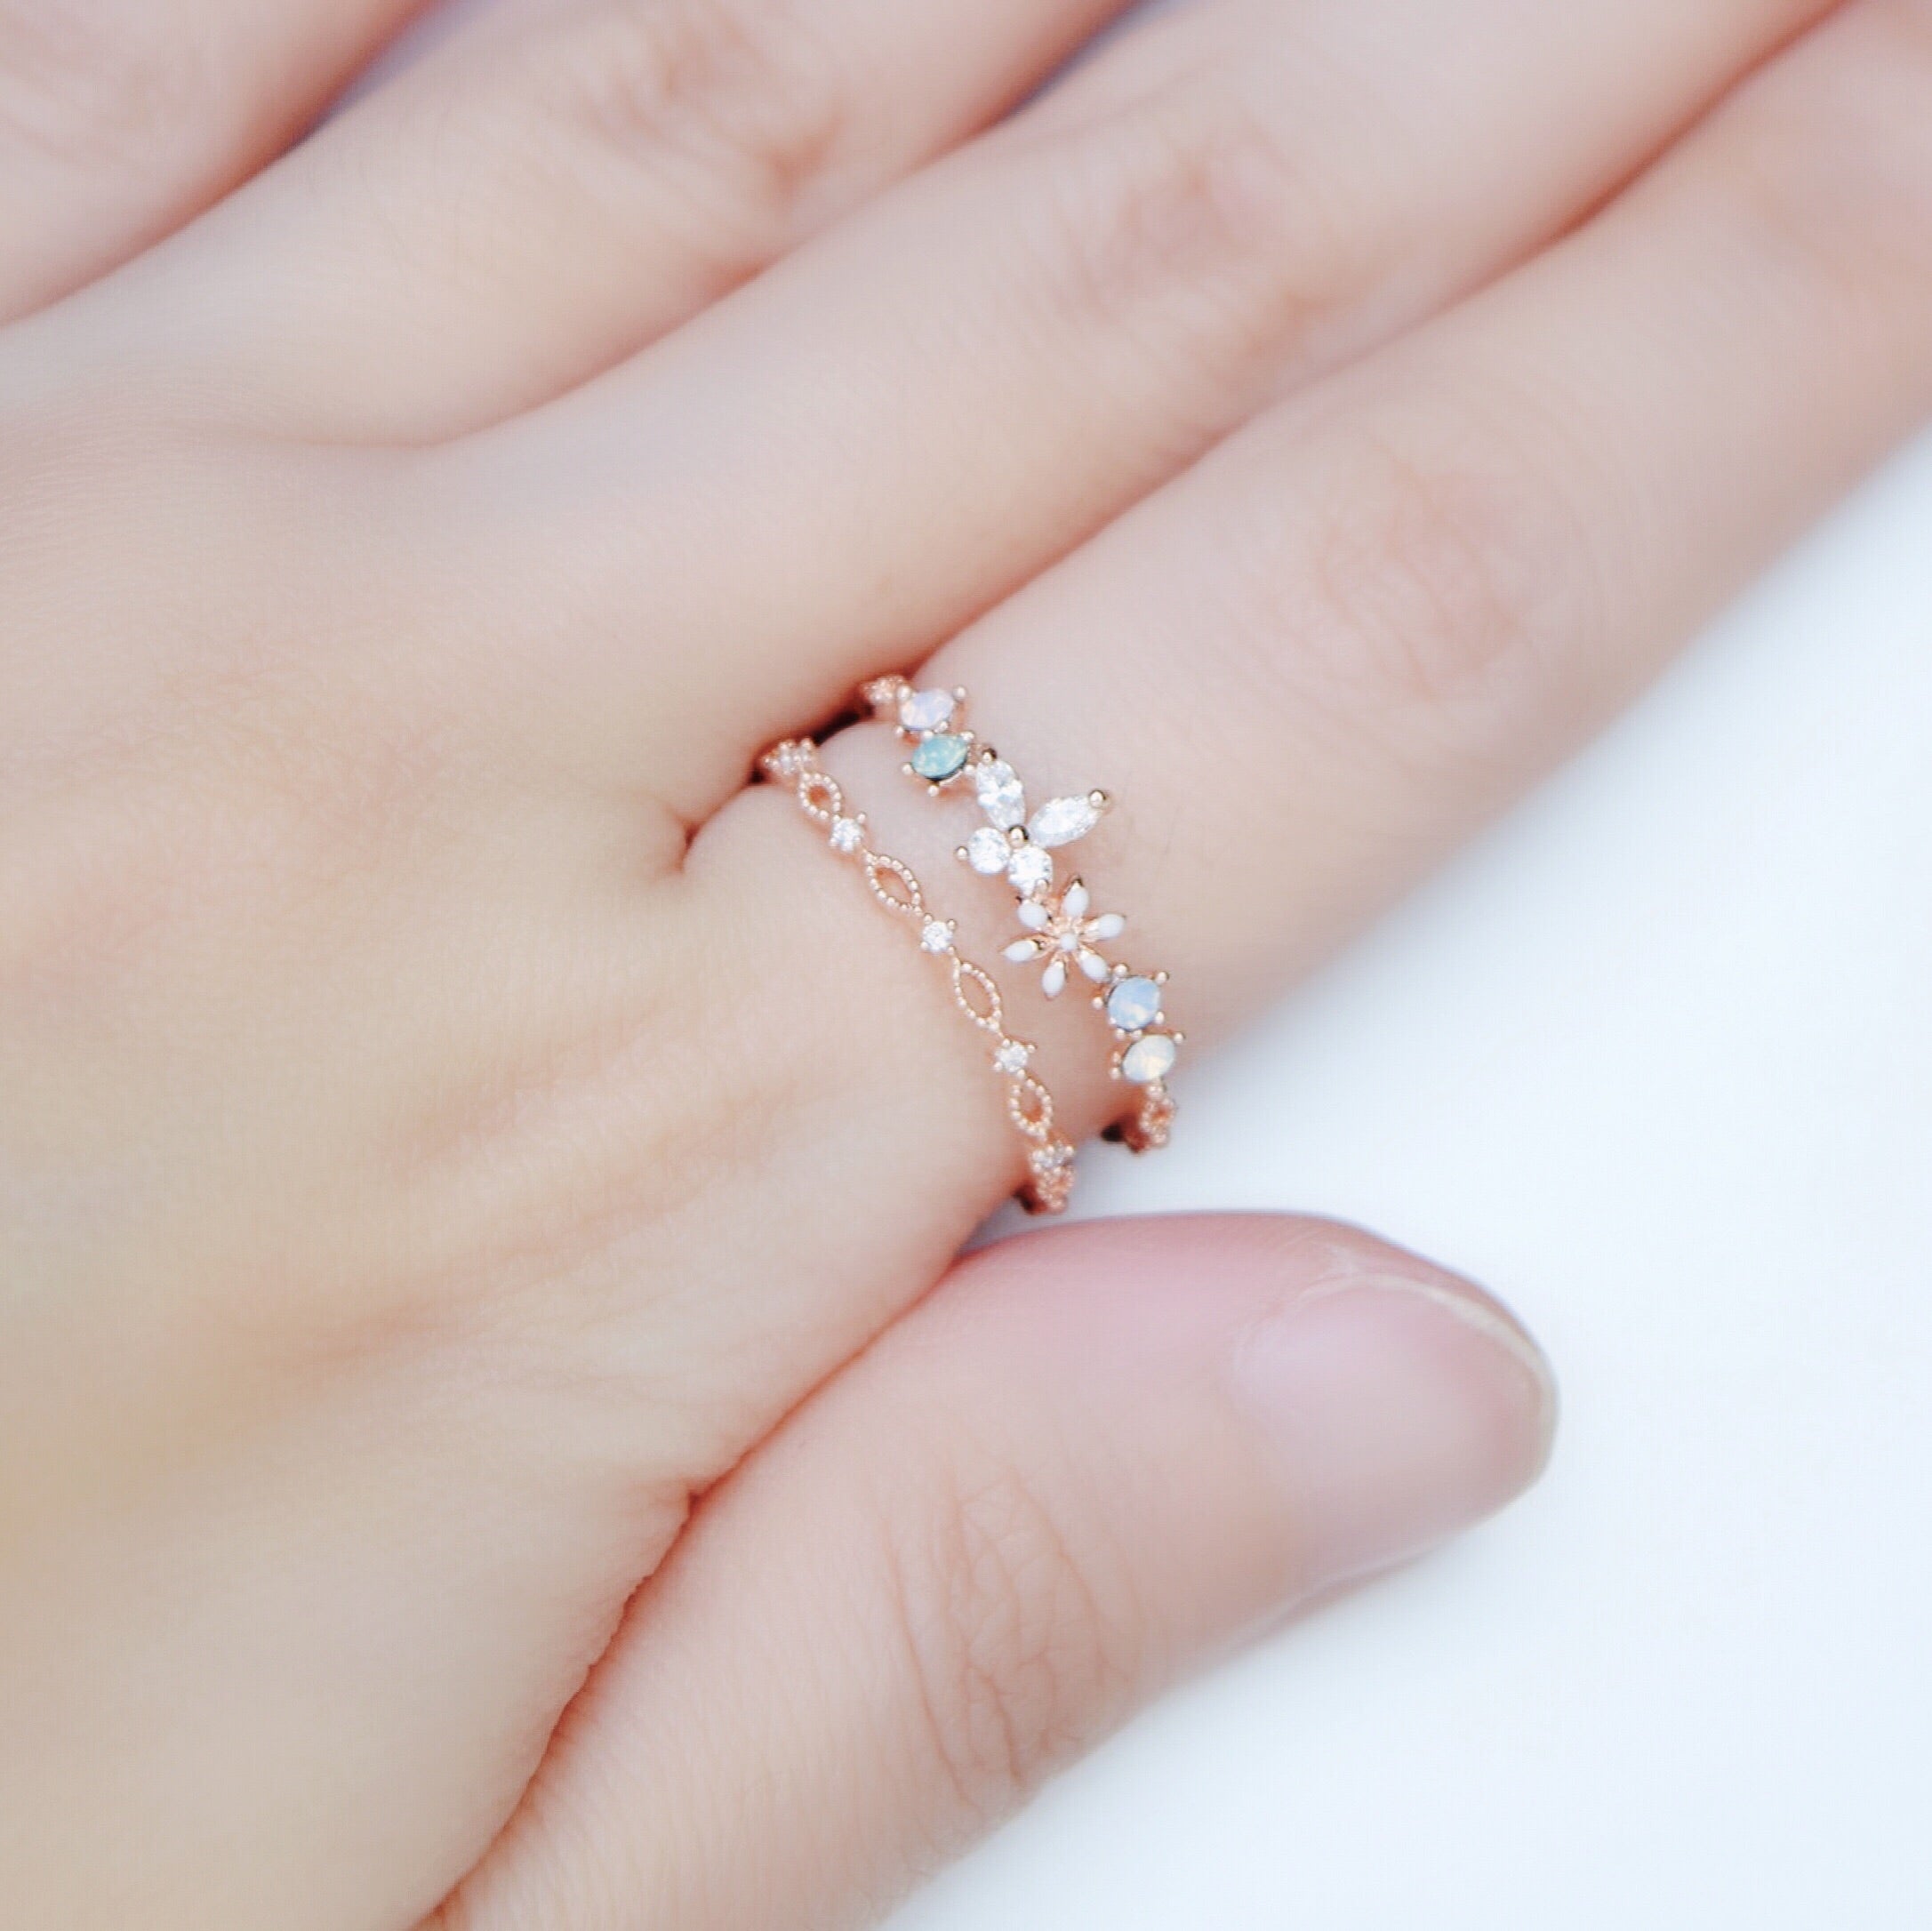 Rose Gold Ring Korea Made Rings Cubic Zirconia Stone 925 Silver Daily Wear Cincin Adjustable Gift For Her Surprise Jewellery Jewelry Malaysia Accessory